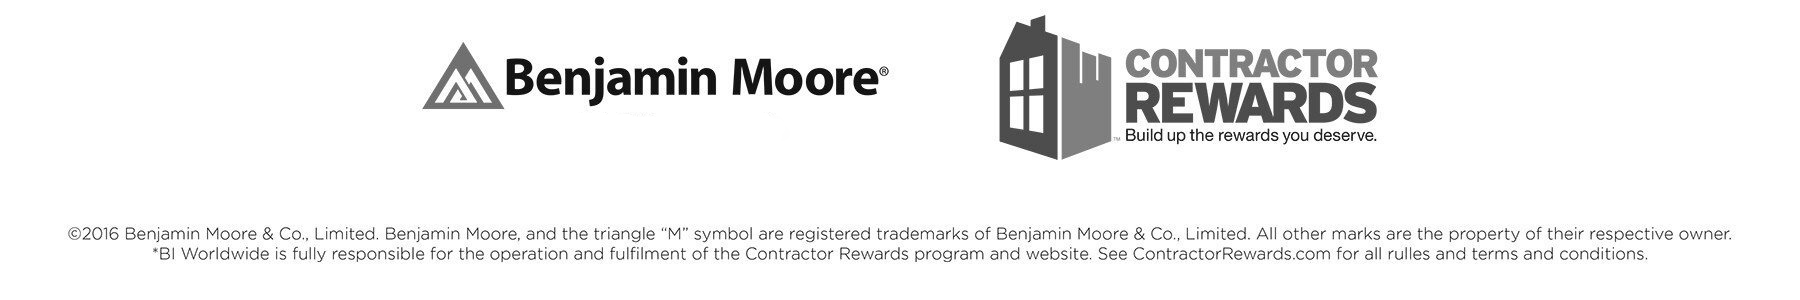 Benjamin Moore Contractor Rewards: Build up the rewards you deserve at your local Colorize store!